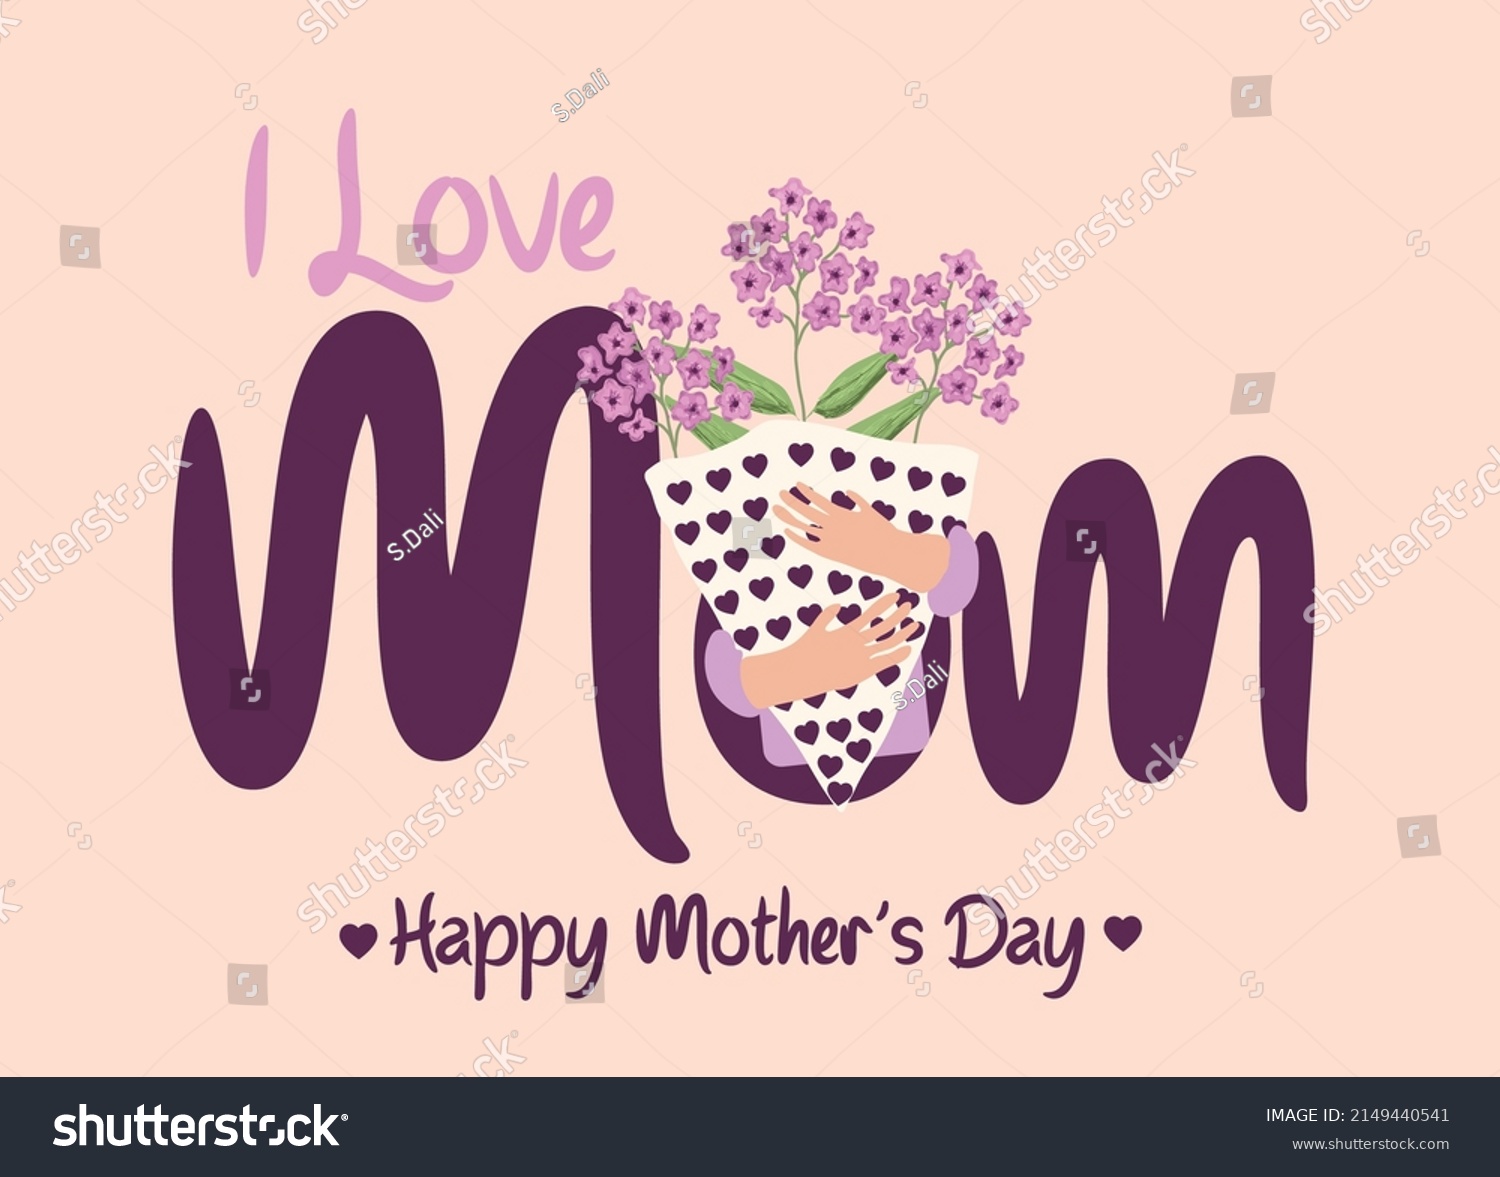 Happy Mothers Day Love Mom Illustration Stock Vector Royalty Free 2149440541 Shutterstock